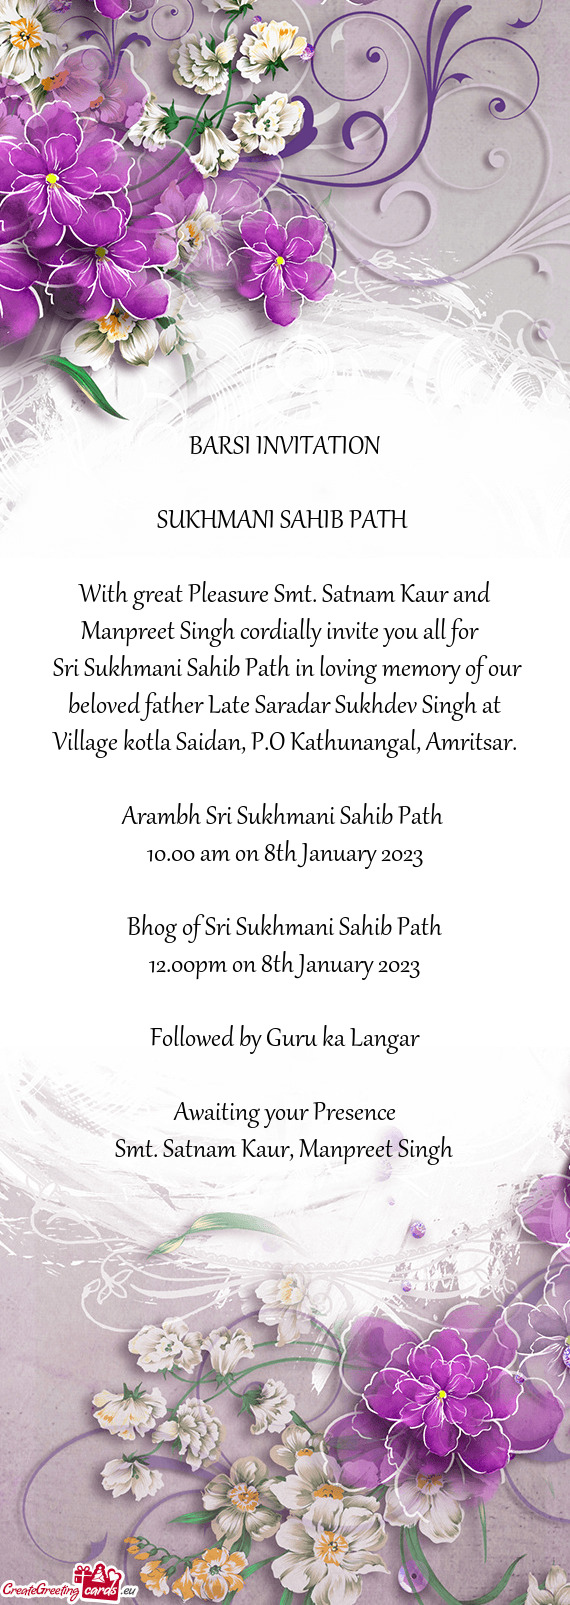 With great Pleasure Smt. Satnam Kaur and Manpreet Singh cordially invite you all for